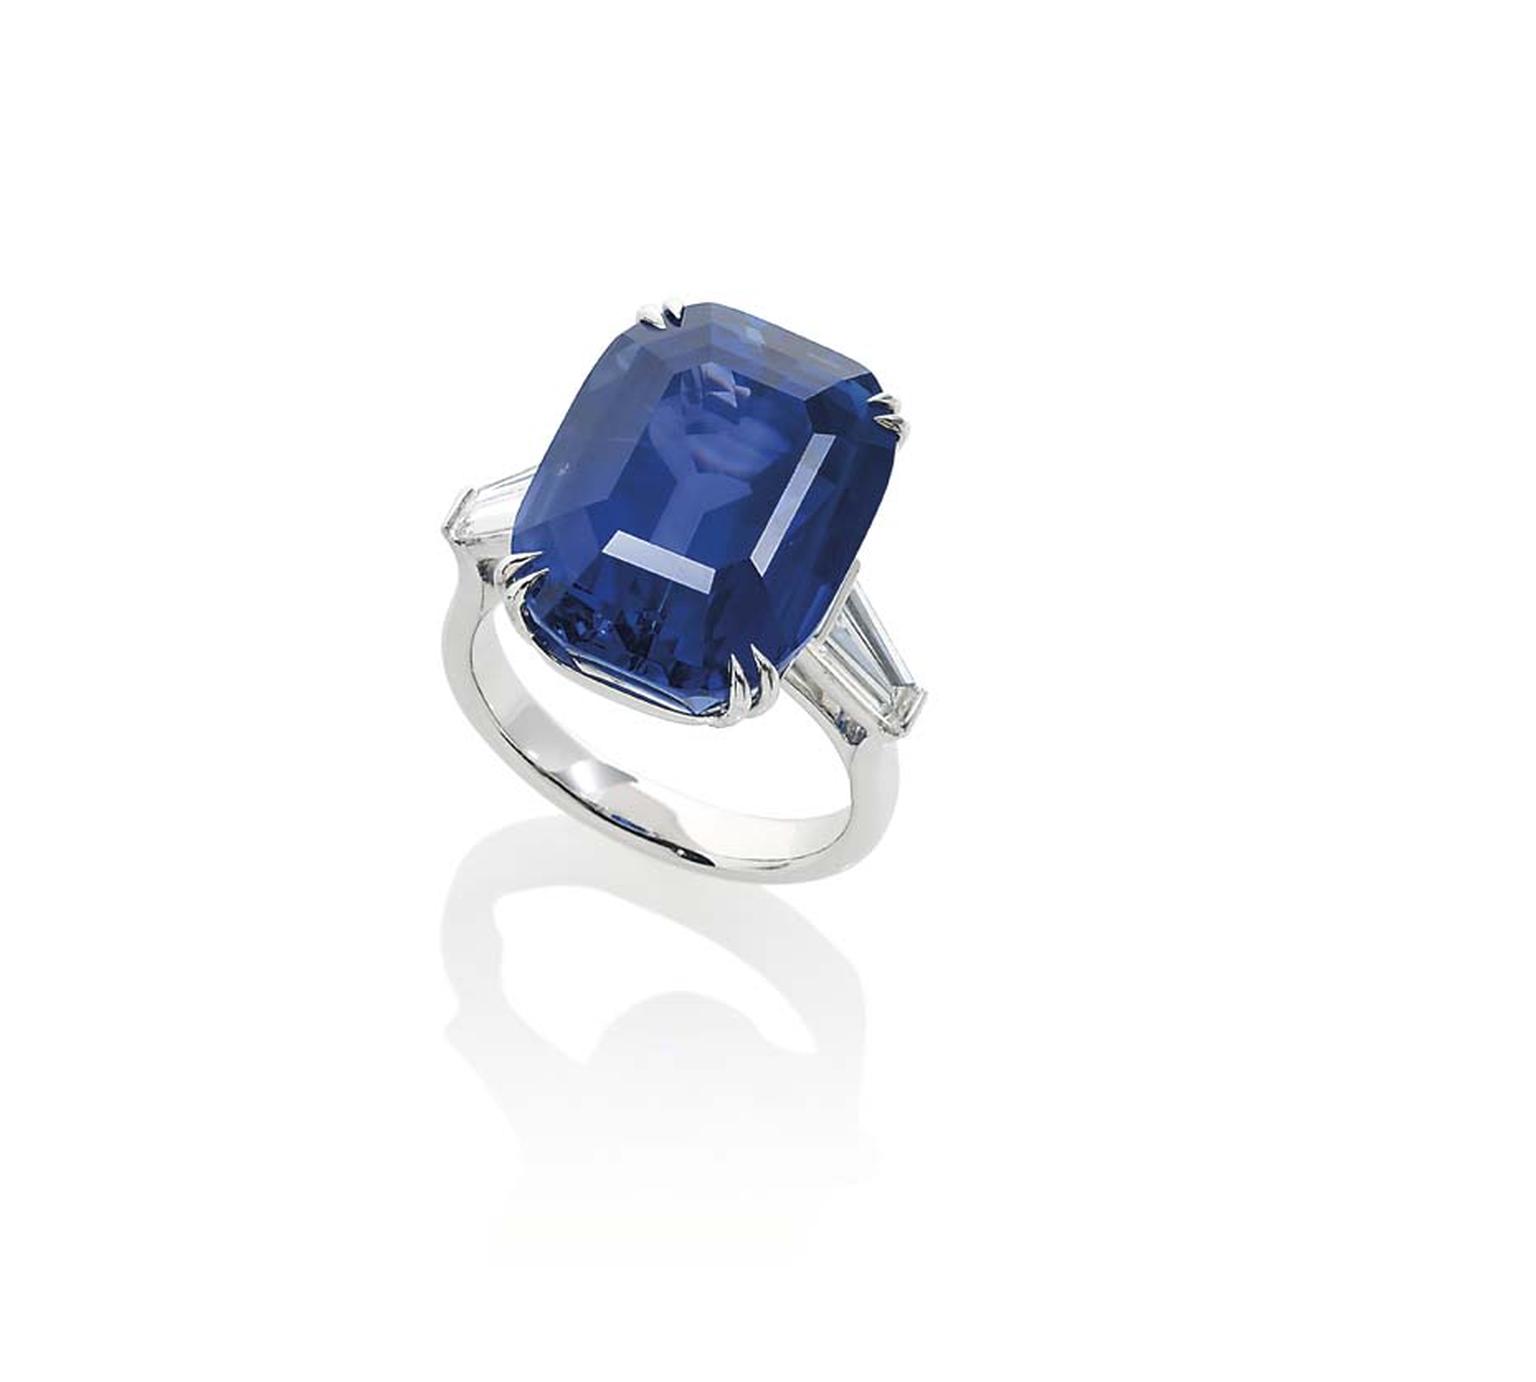 Lot 434, a 23.00ct Ceylon sapphire ring, flanked by diamonds (estimate: £140,000-180,000), makes up a very special trio of sapphires at Christie's Important Jewels sale in London on 26 November 2014.